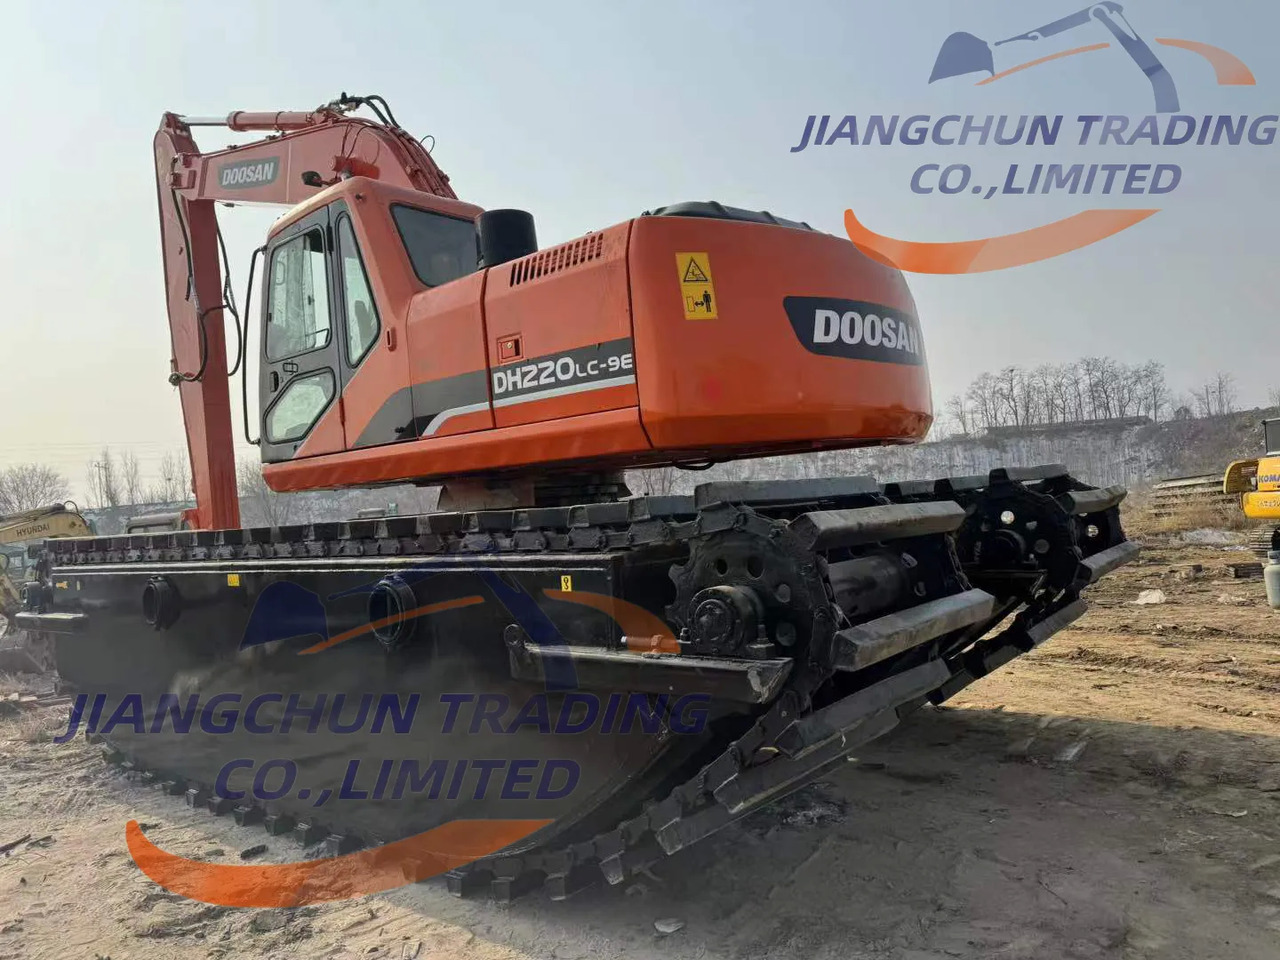 Багер Doosan used Excavator used  DH220LC-9E DH220-9 have long arm good condition Japan import excavator for sale: снимка 6